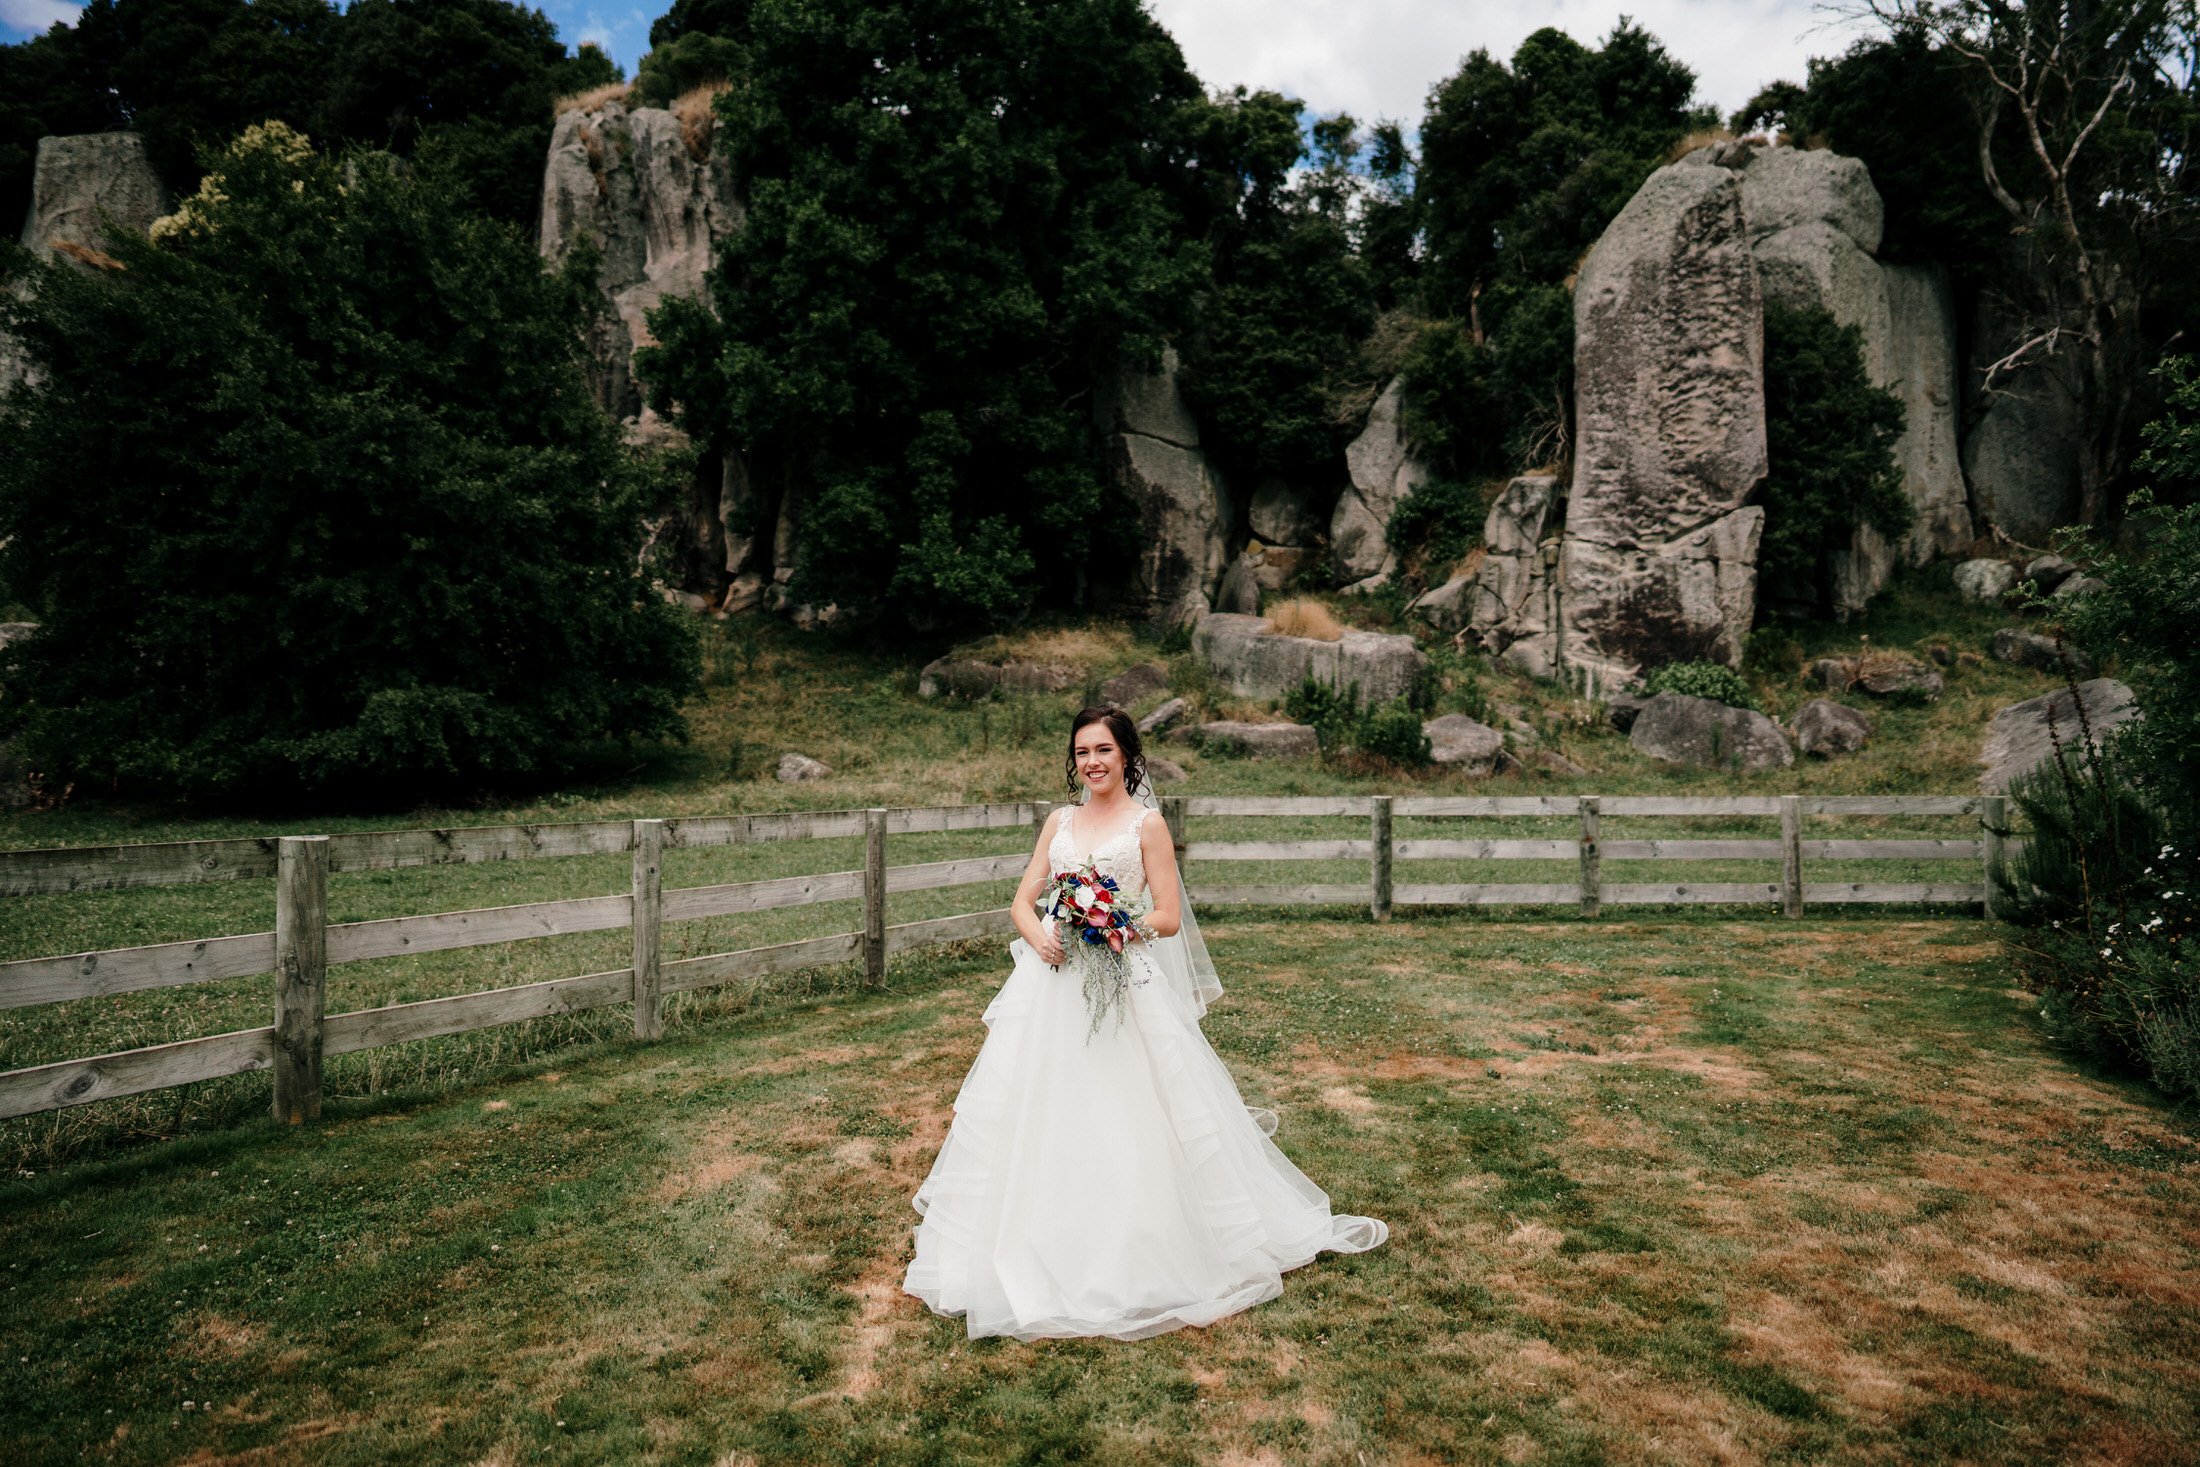 the-rocks-accommodation-airbnb-auckland-wedding-photographer-videographer-dear-white-productions-beat-hamilton-venue-red-barn-shed-getting-ready (8).jpg